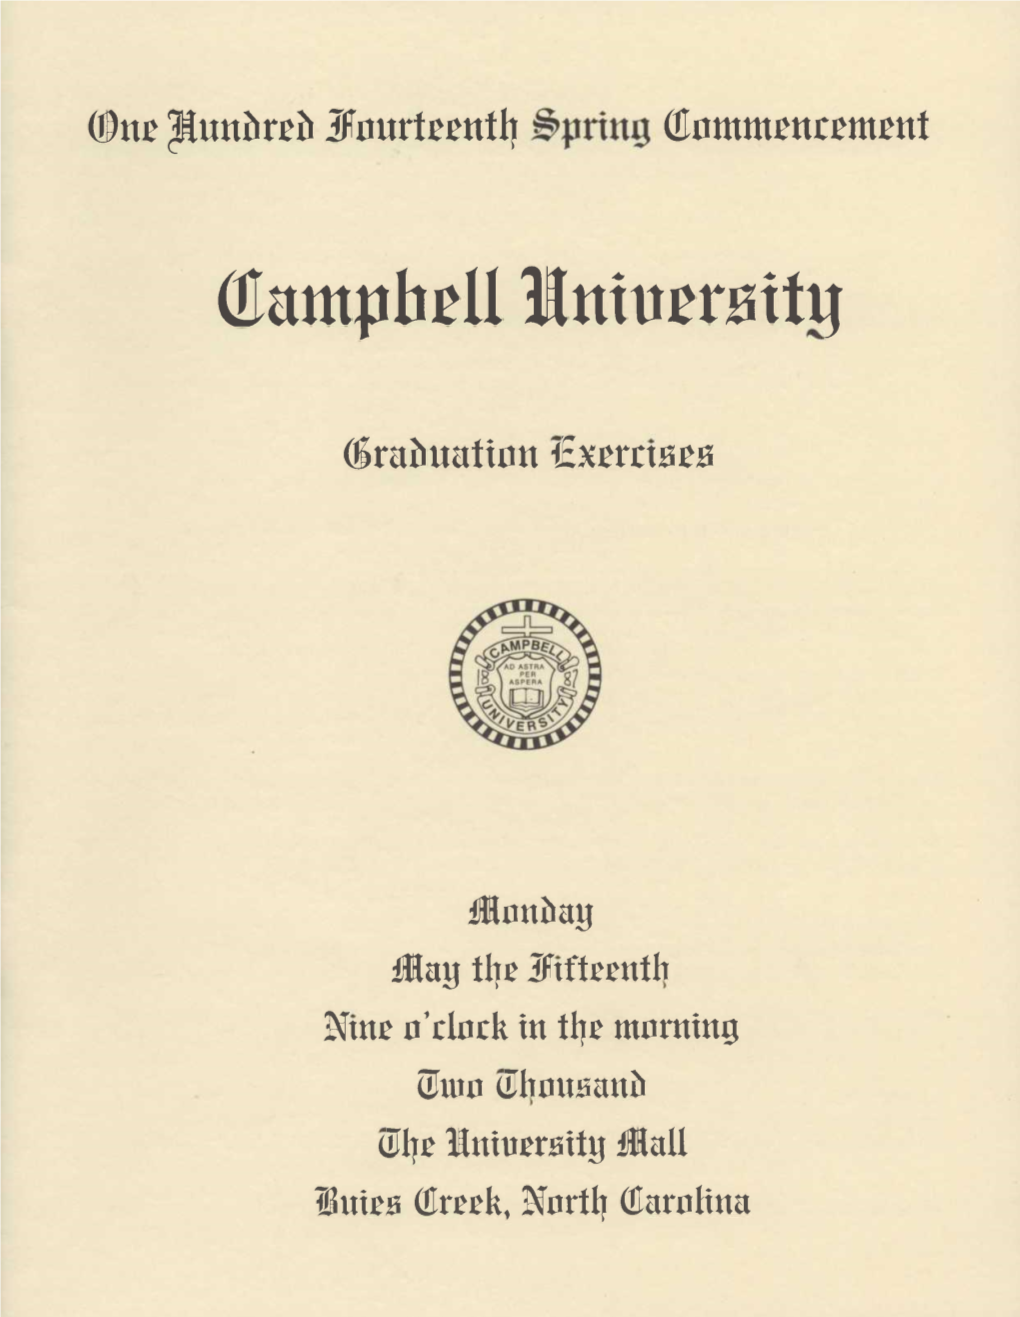 One Hundred Fourteenth Spring Commencement (2000)